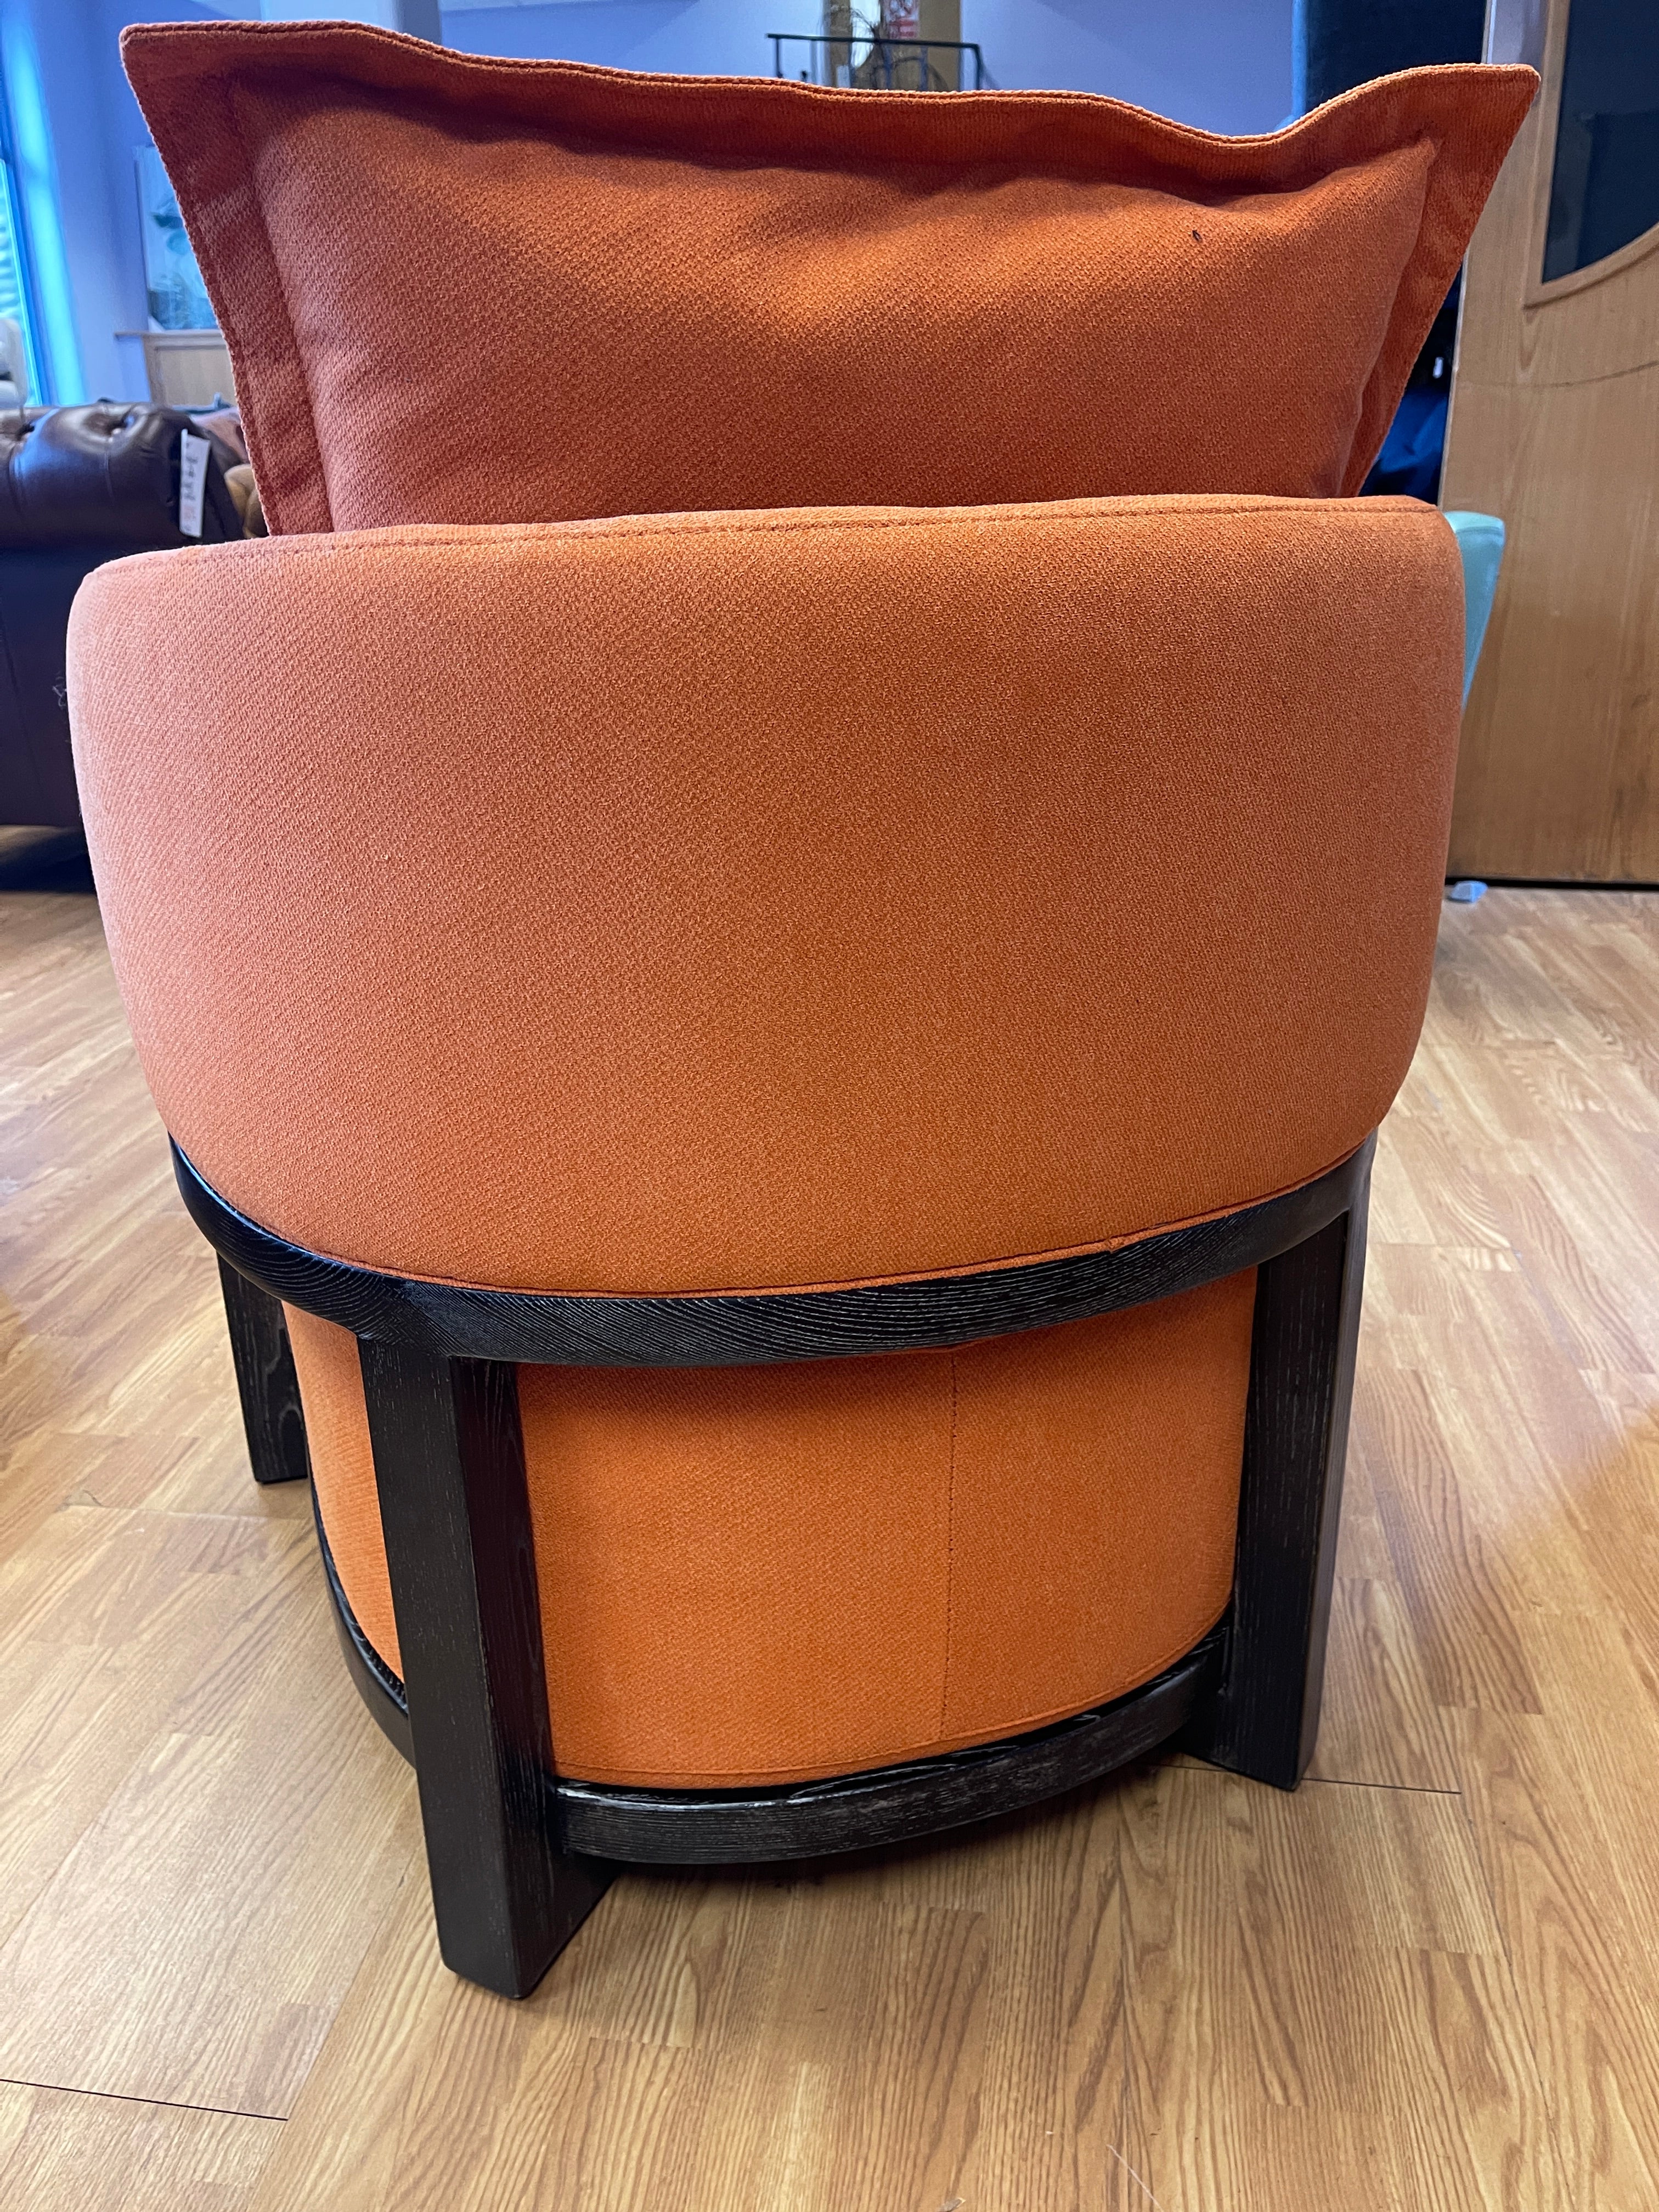 WHITE LABEL Lounge Club style small accent chair in orange fabric